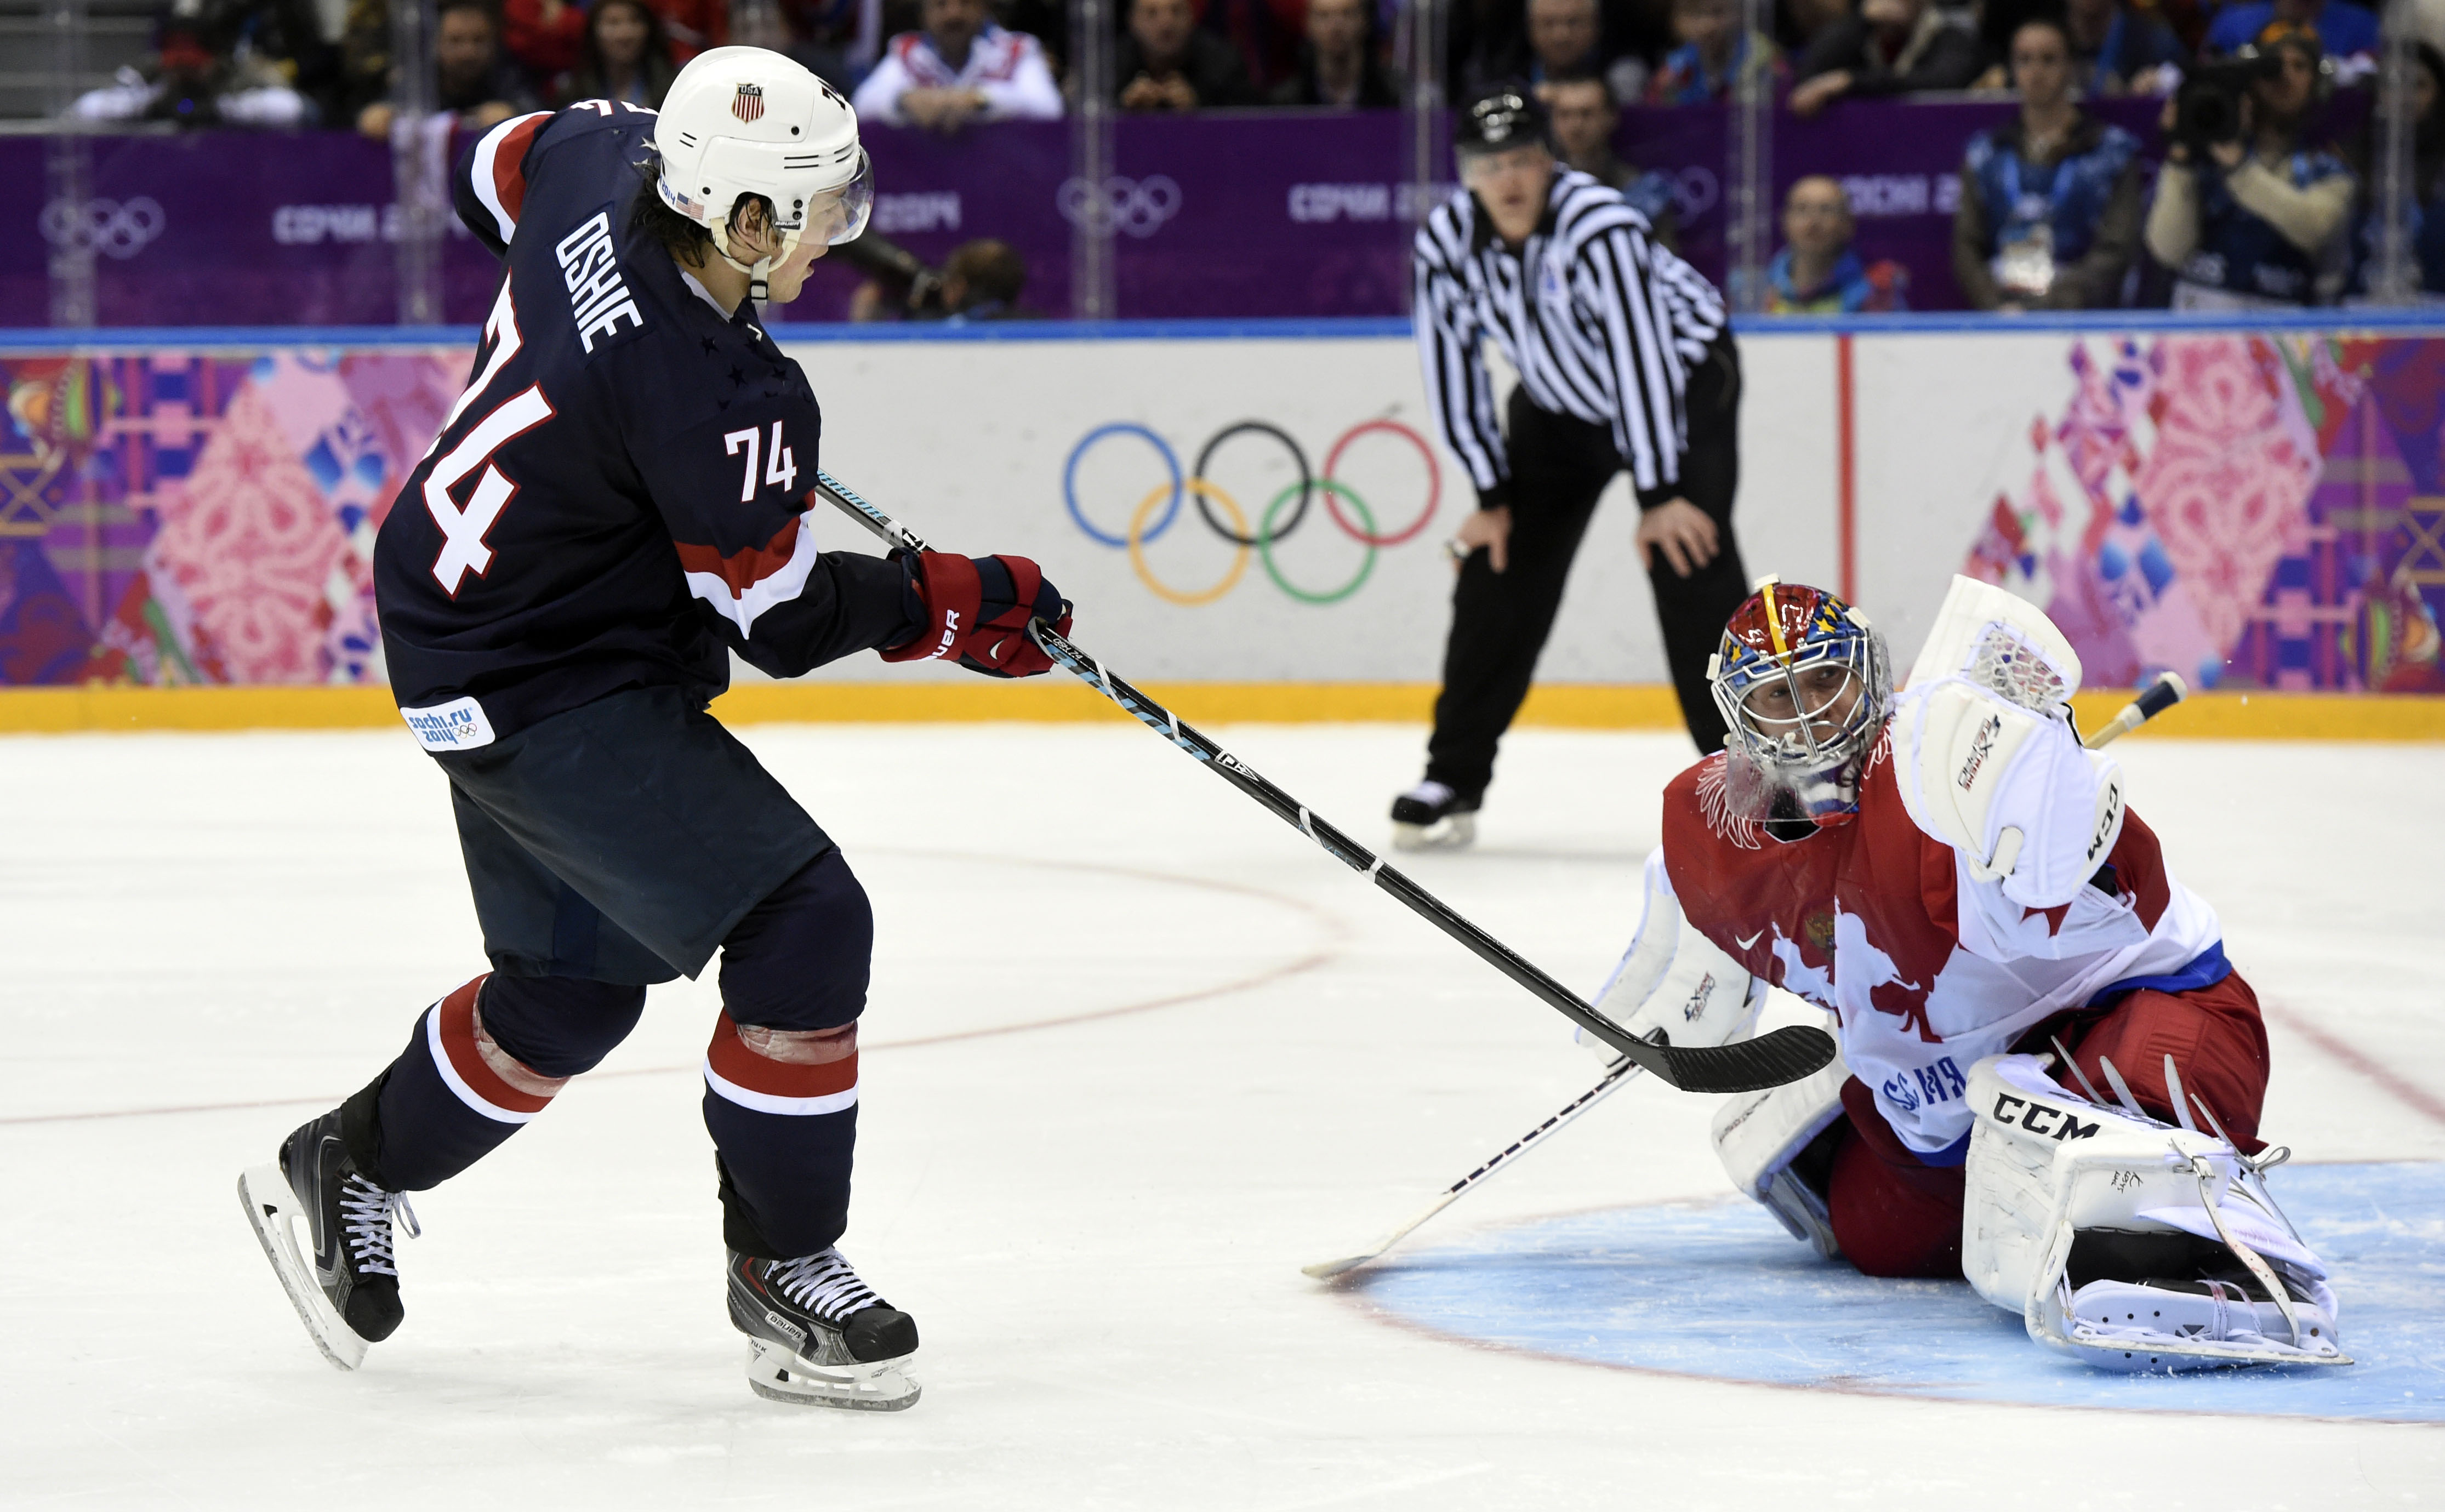 Olympic Hockey: Oshie's shootout goals lead U.S. past Russia